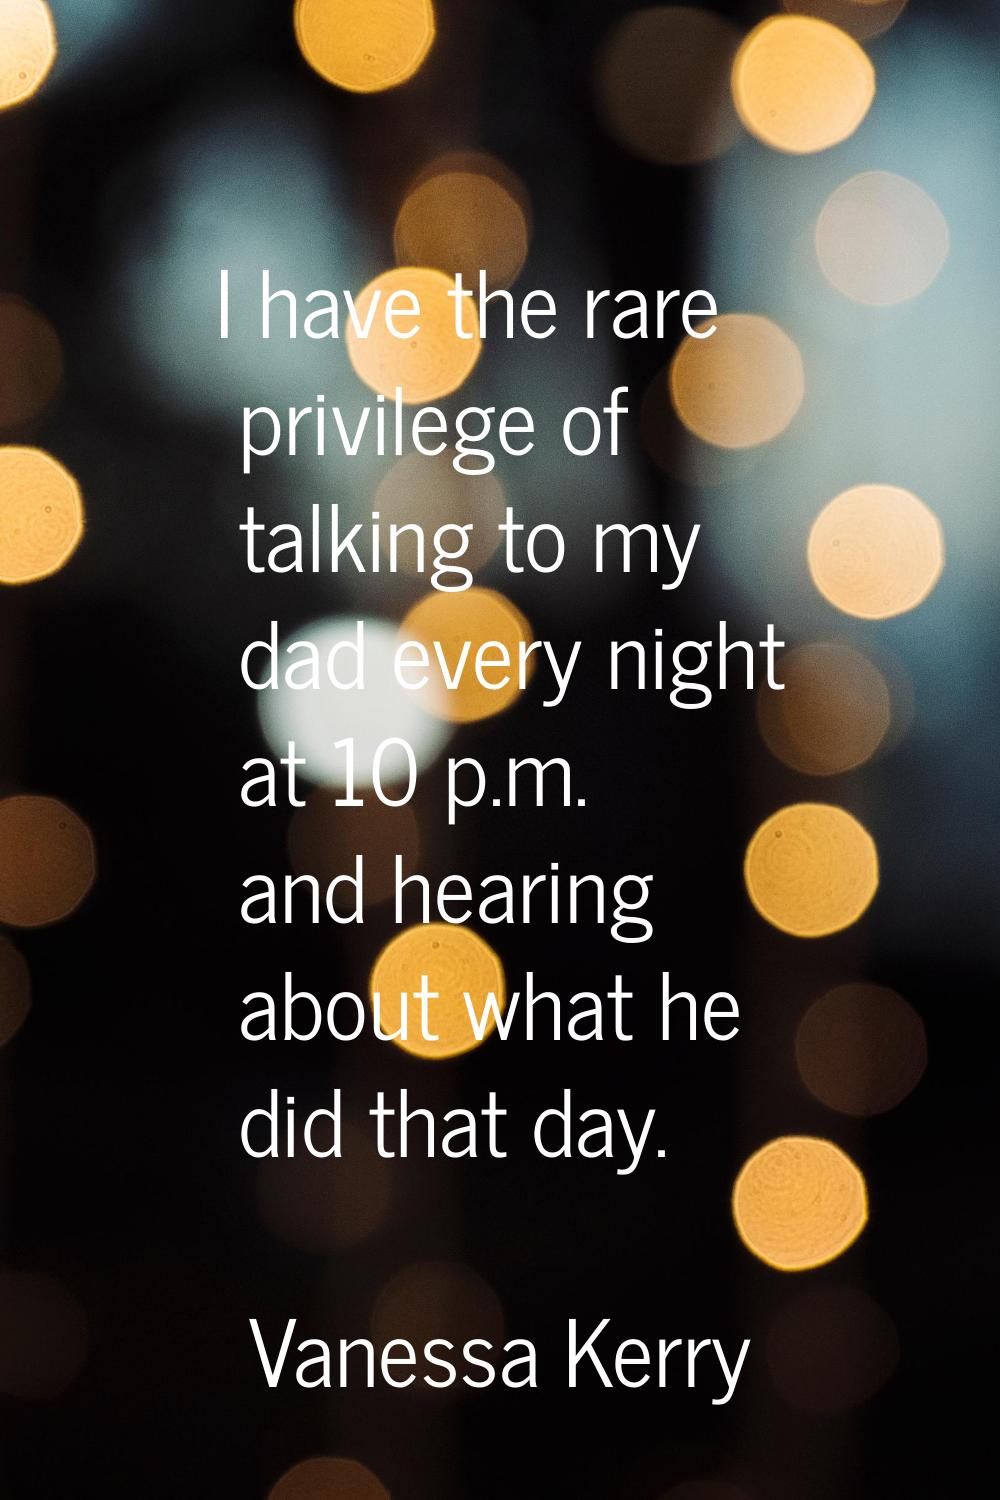 I have the rare privilege of talking to my dad every night at 10 p.m. and hearing about what he did